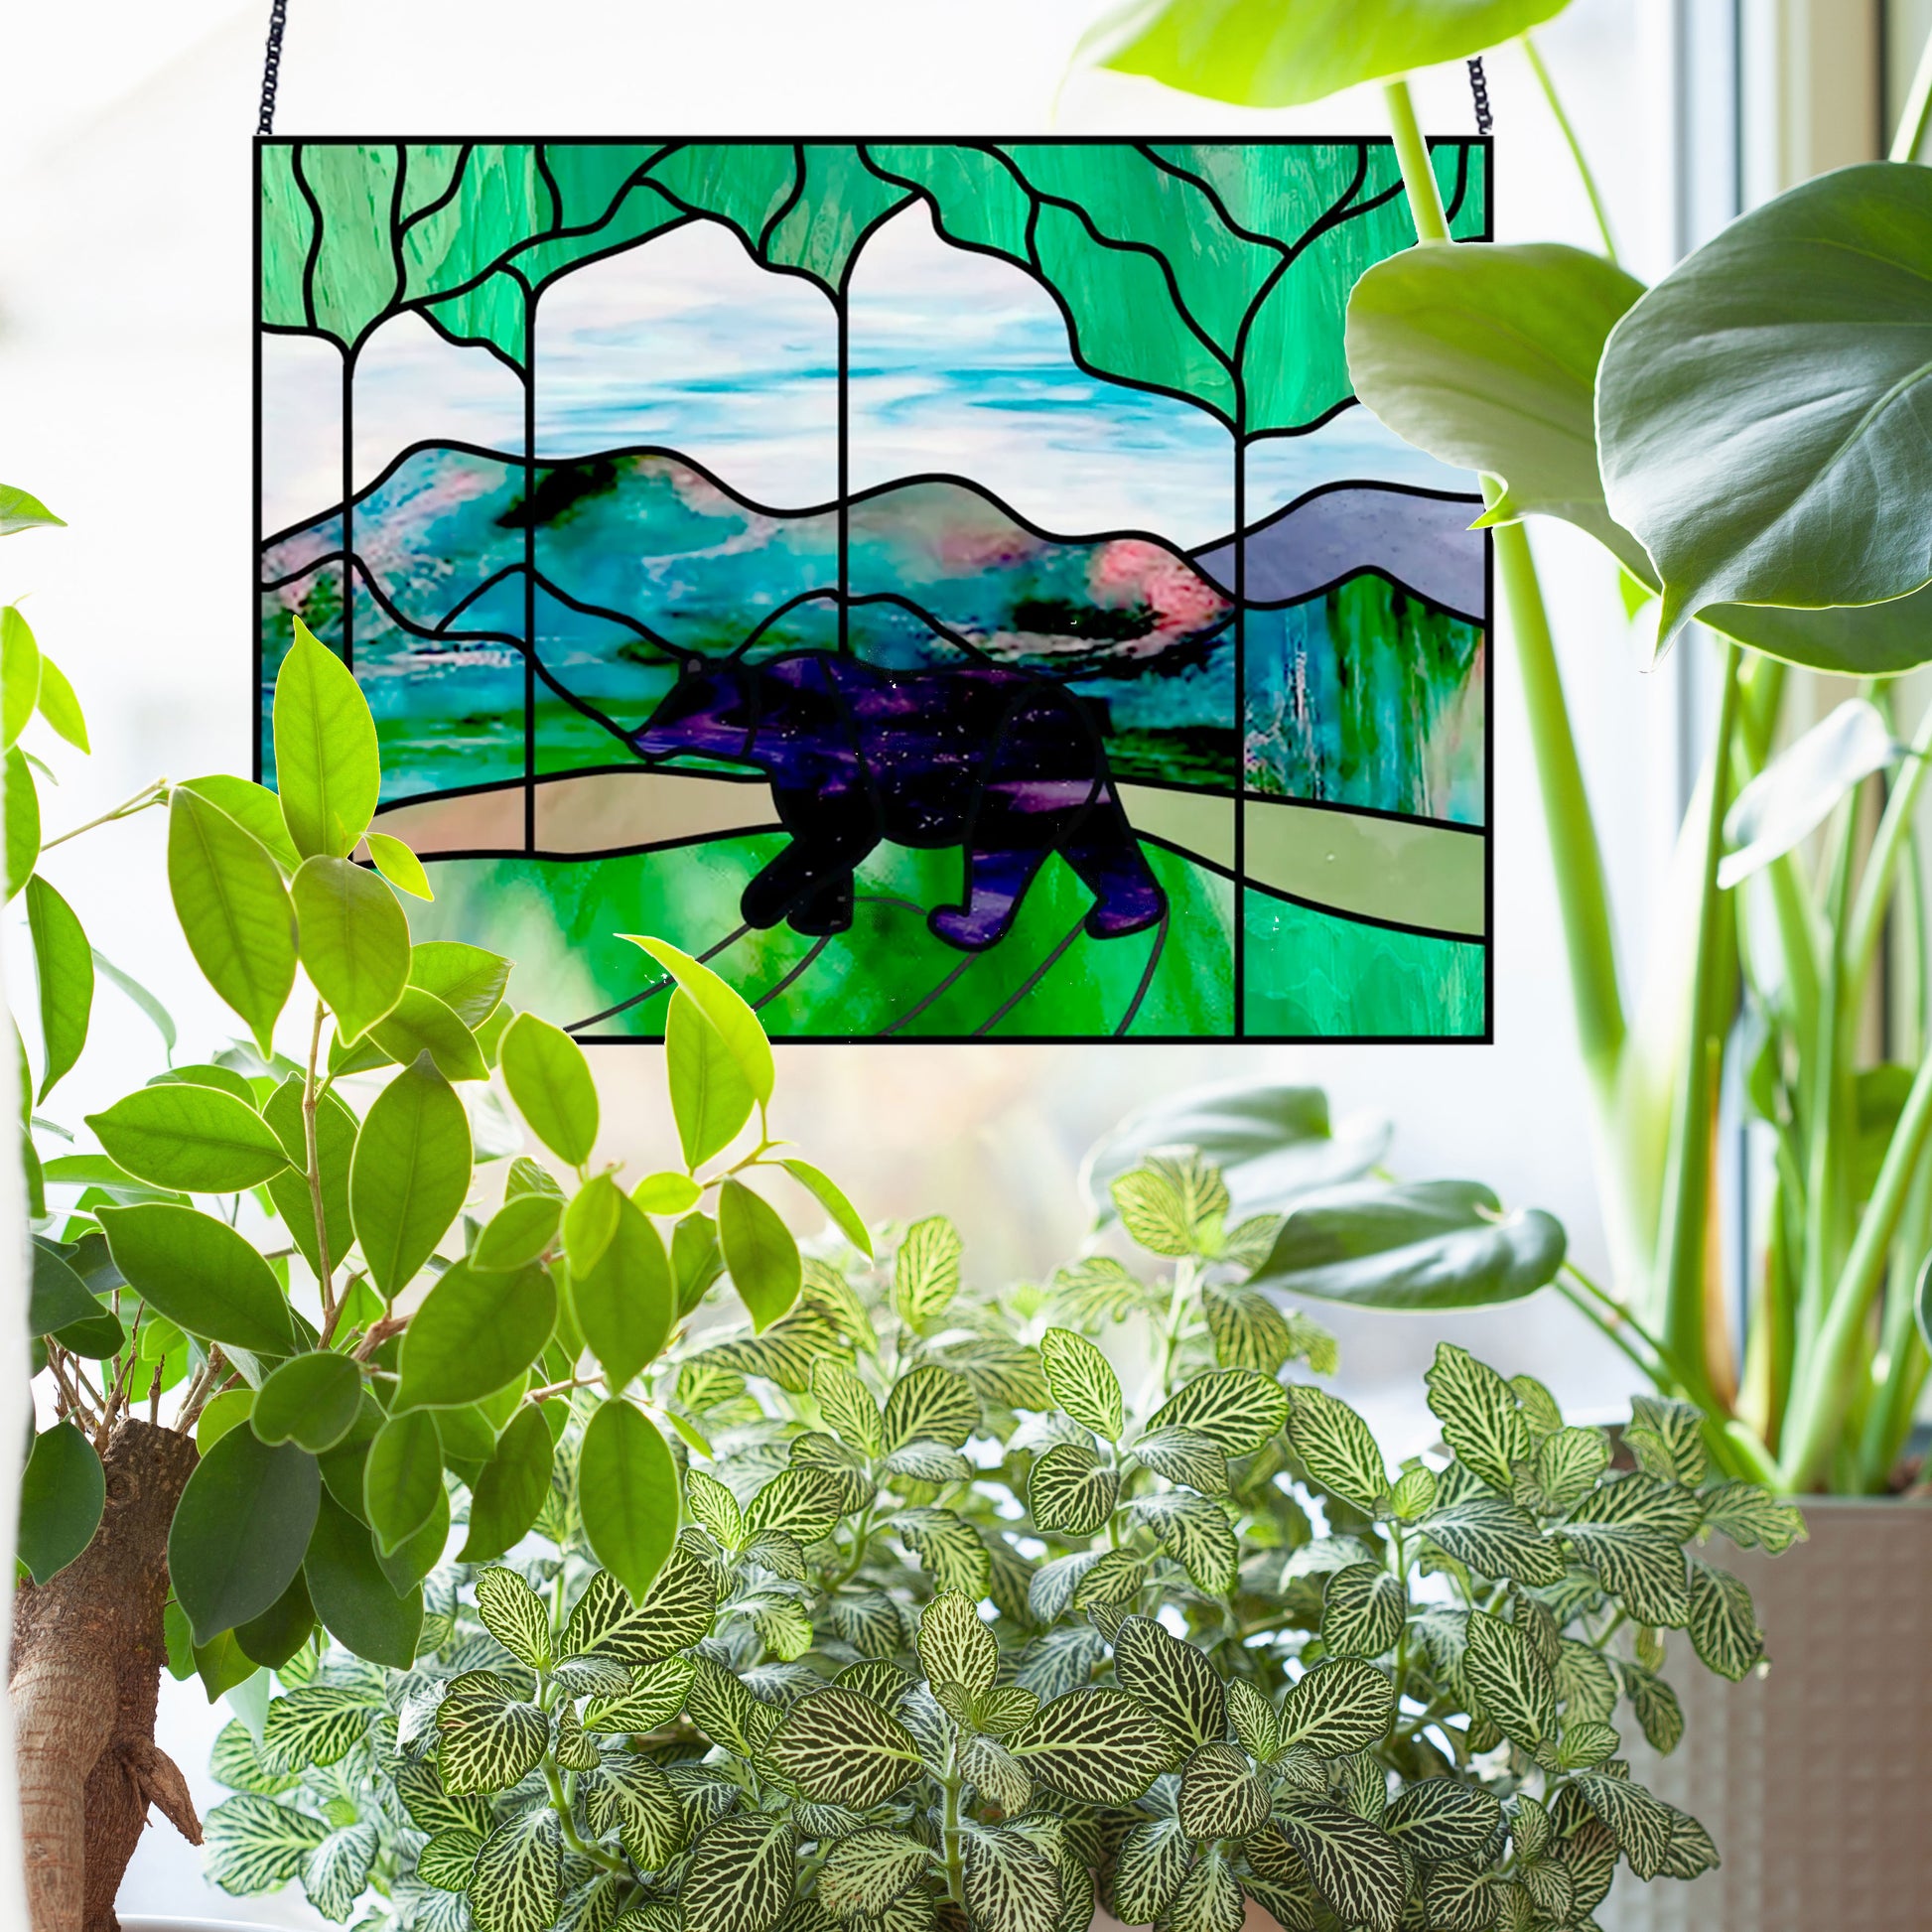 Bear in the forest stained glass pattern, instant pdf, shown in window with plants